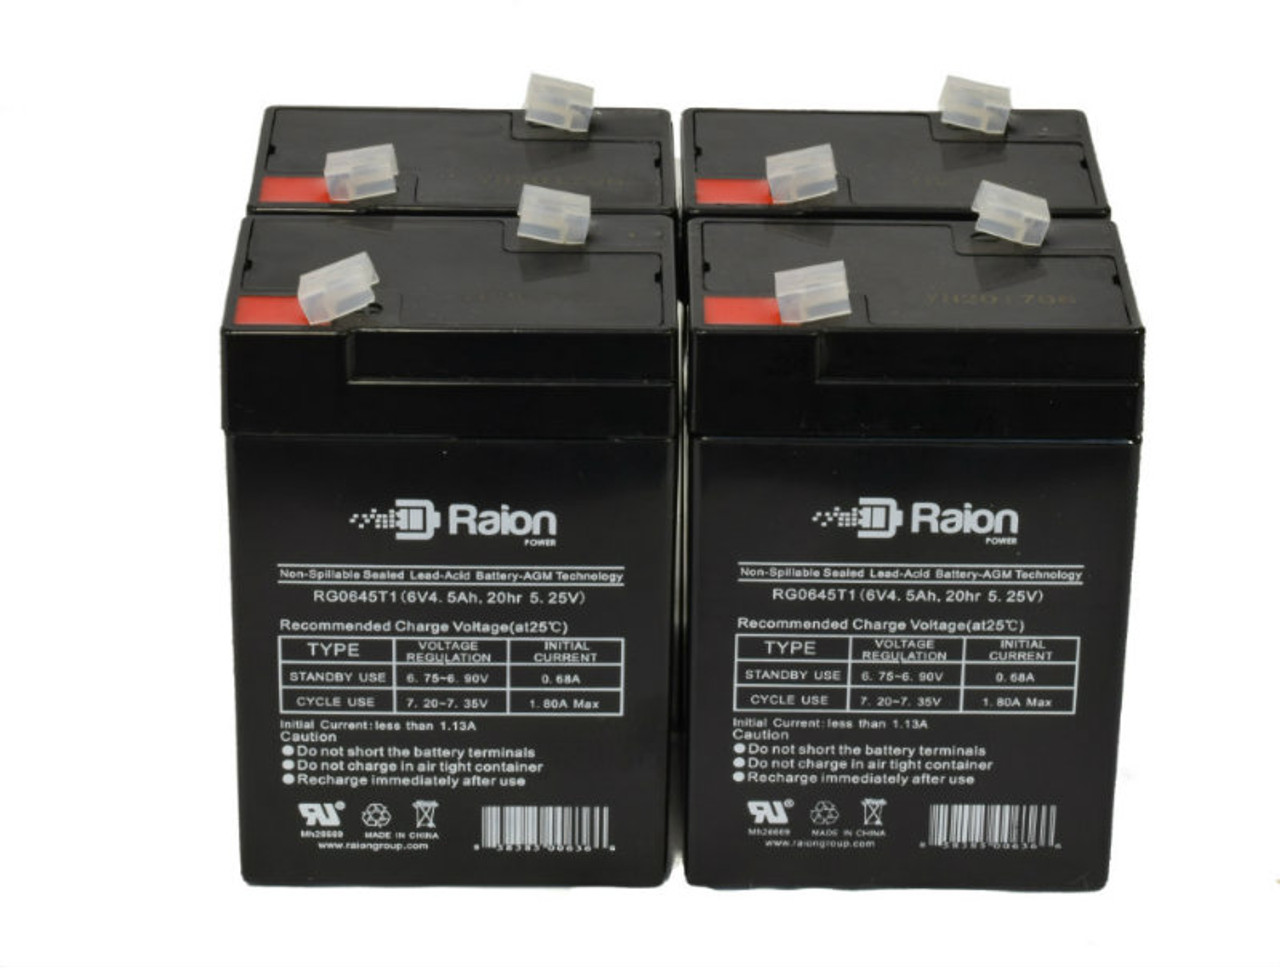 Raion Power 6V 4.5Ah Replacement Emergency Light Battery for Holophane M3 - 4 Pack